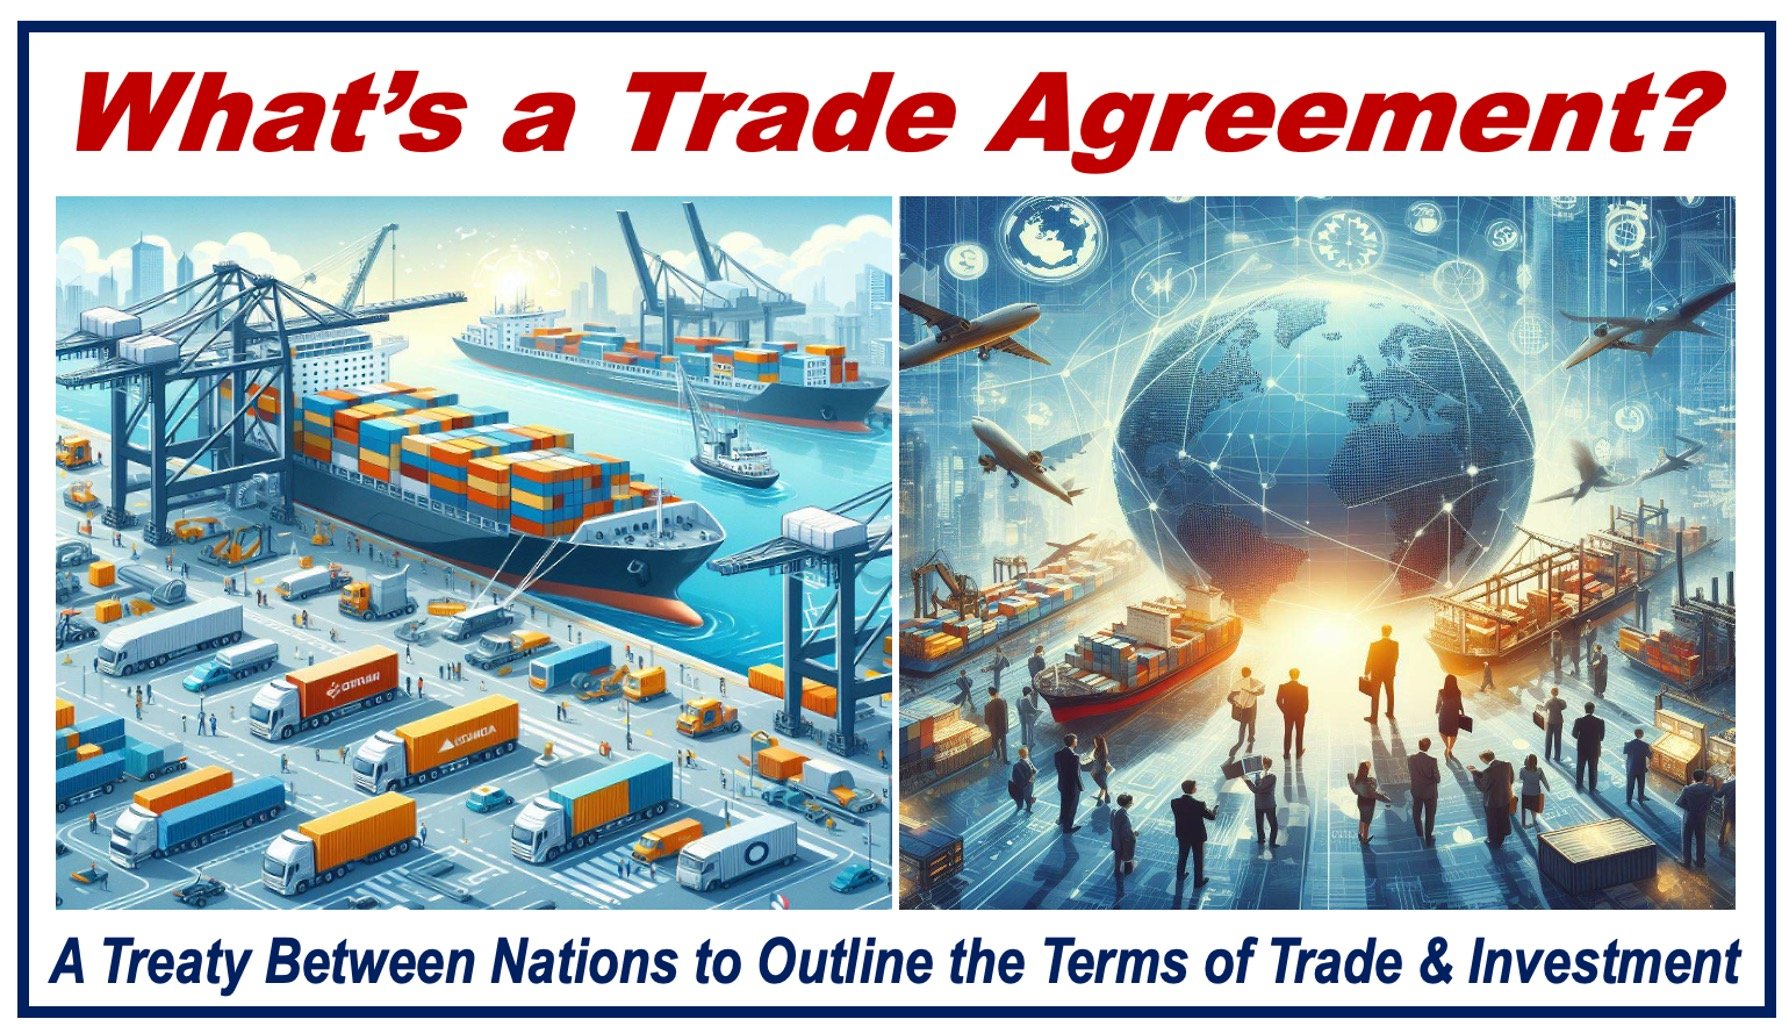 What are trade agreements?